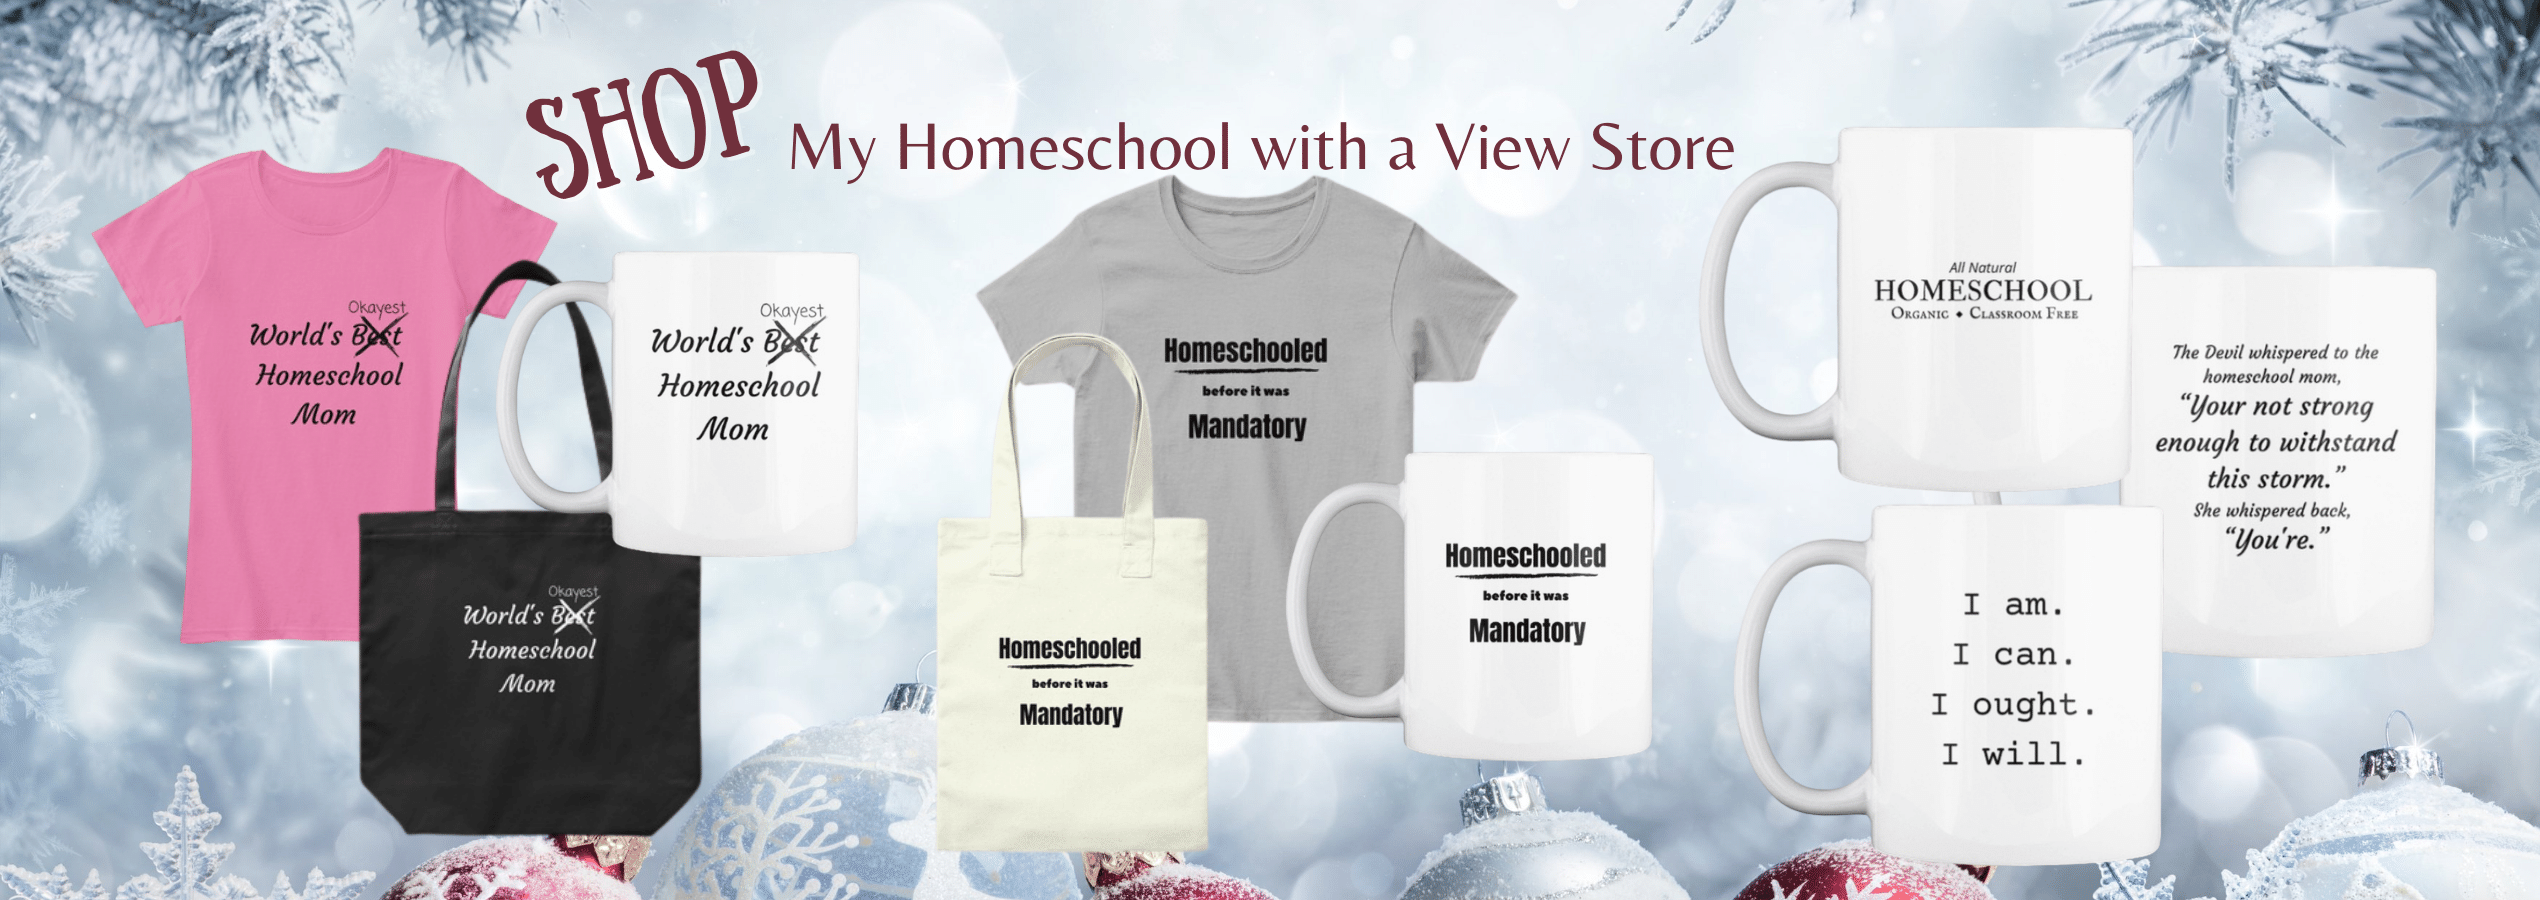 Shop the My Homeschool with a View Store